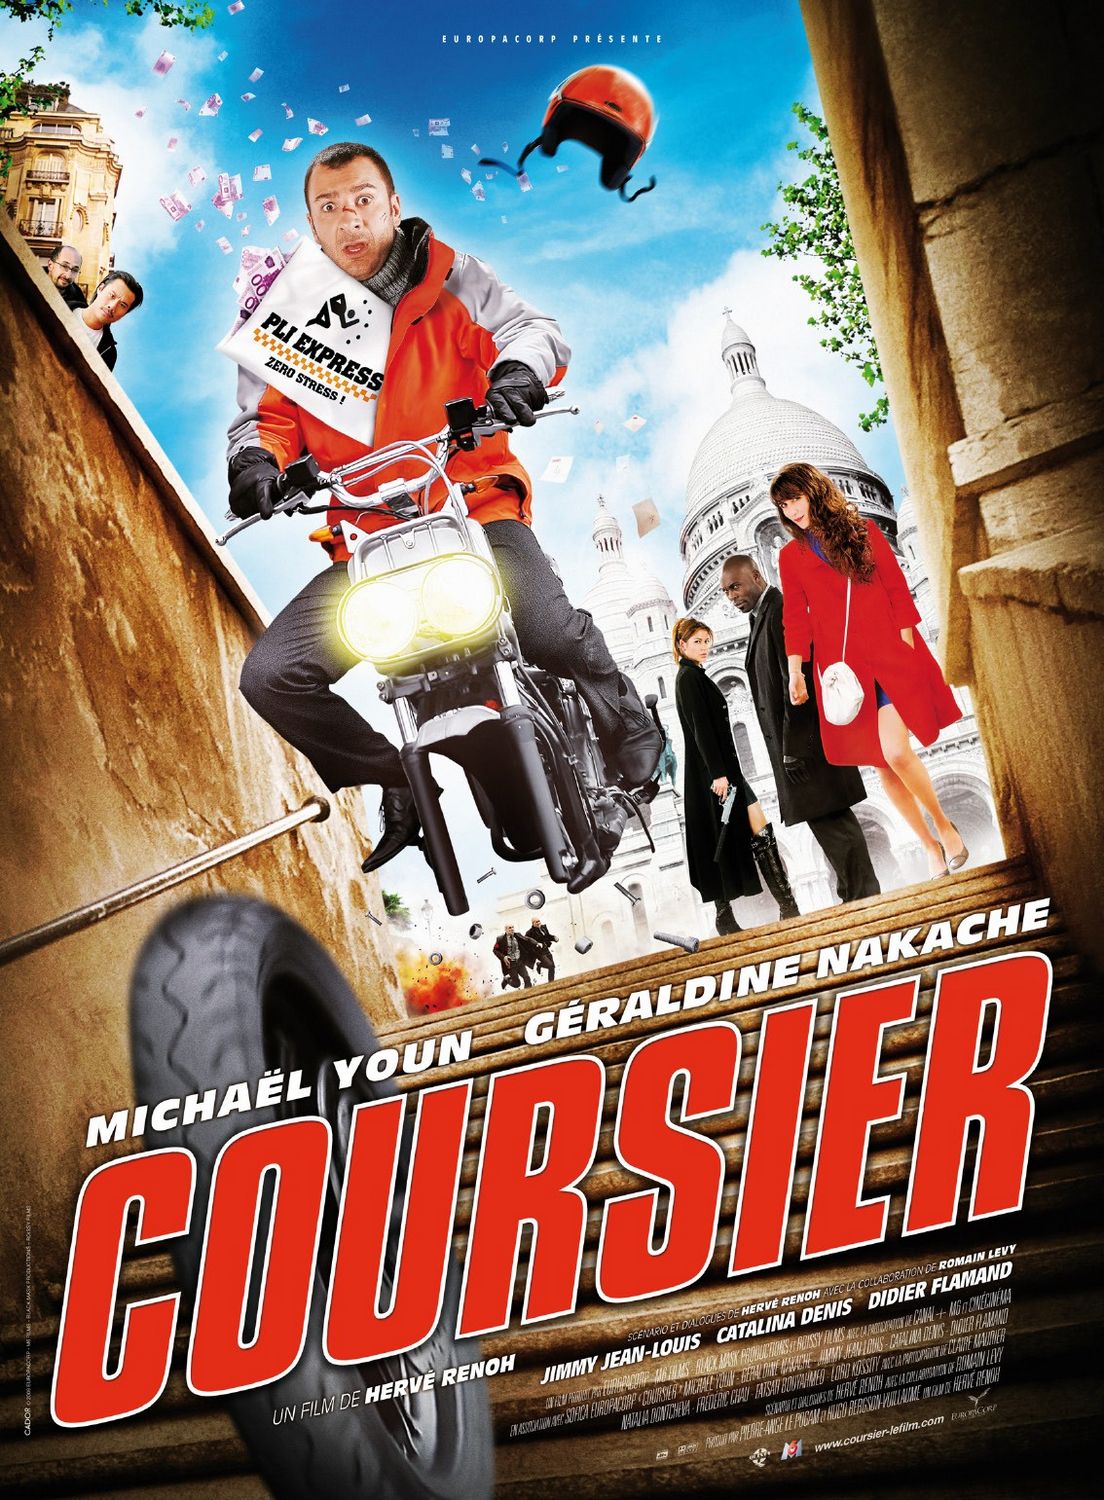 Extra Large Movie Poster Image for Coursier 